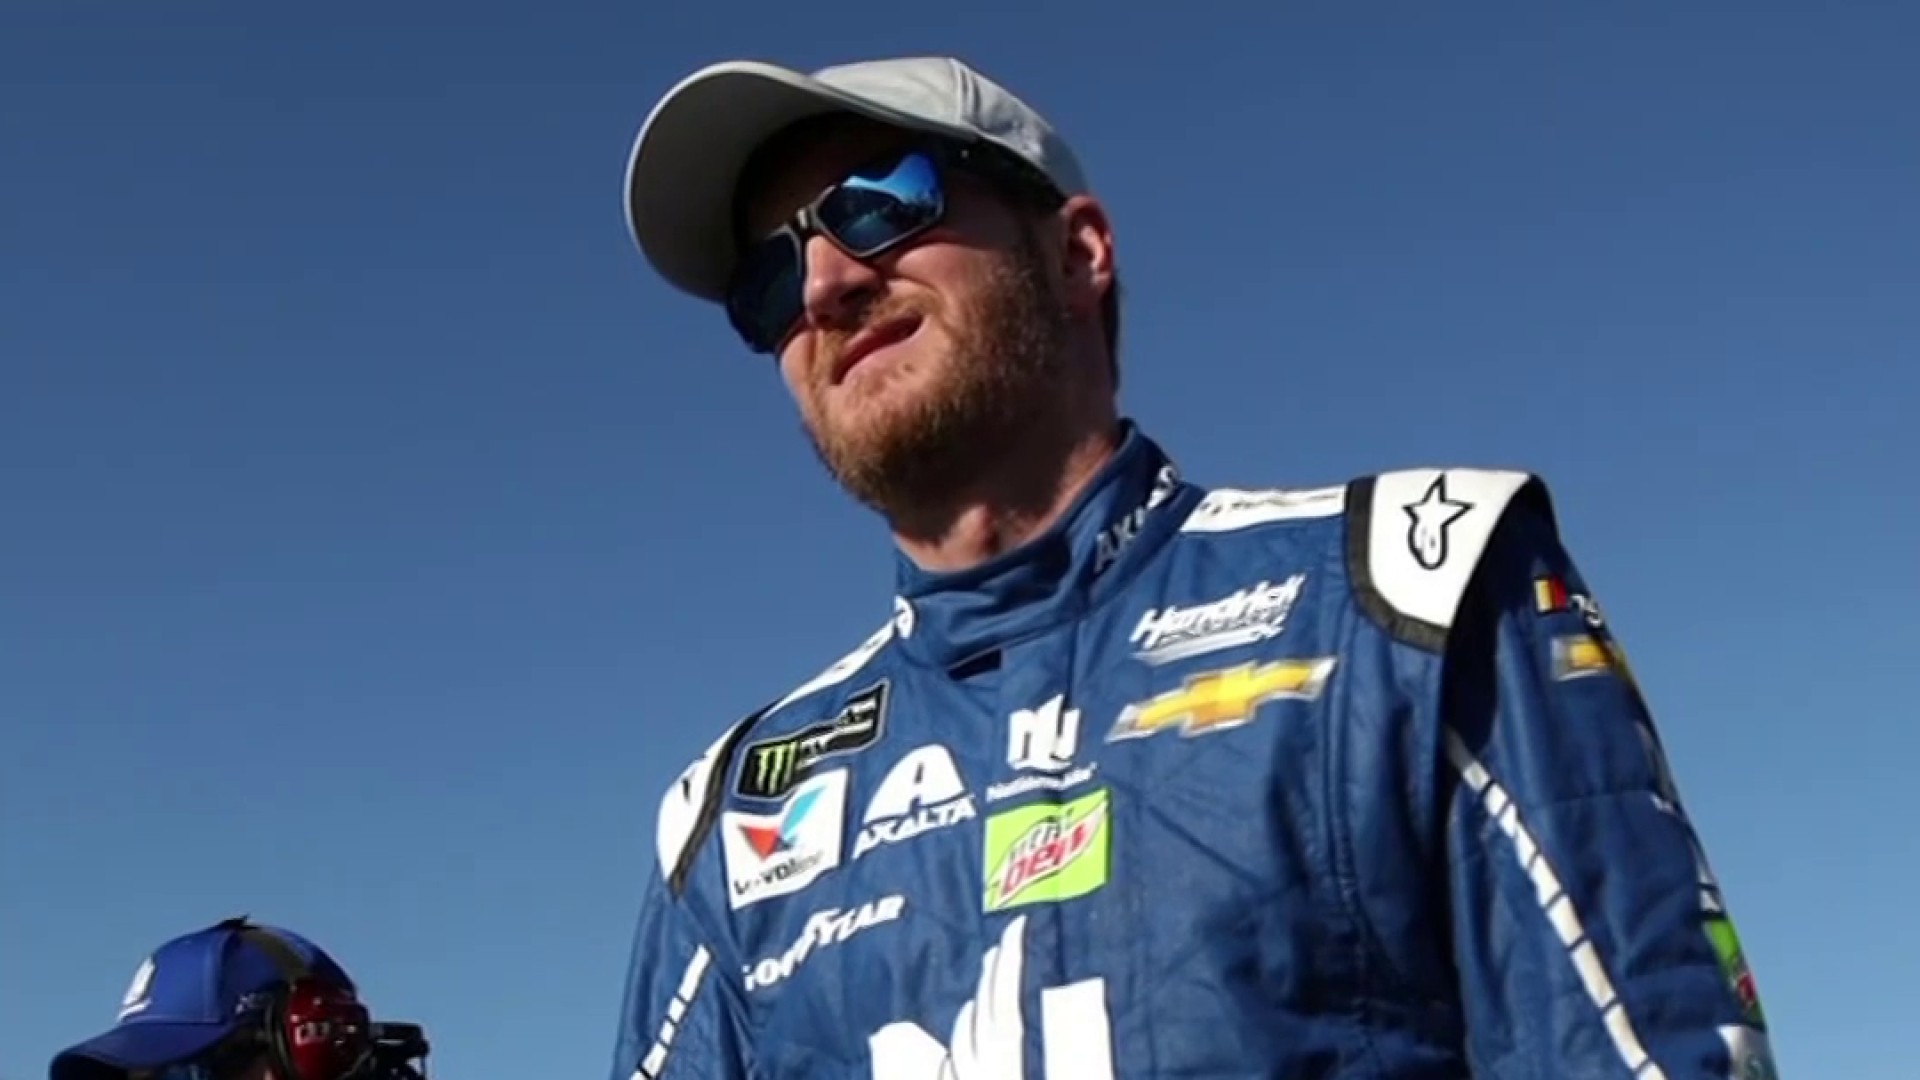 1920x1080 Dale Earnhardt Jr. doesn't carry feuds, but Kevin Harvick's comments hurt |  NBC Sports